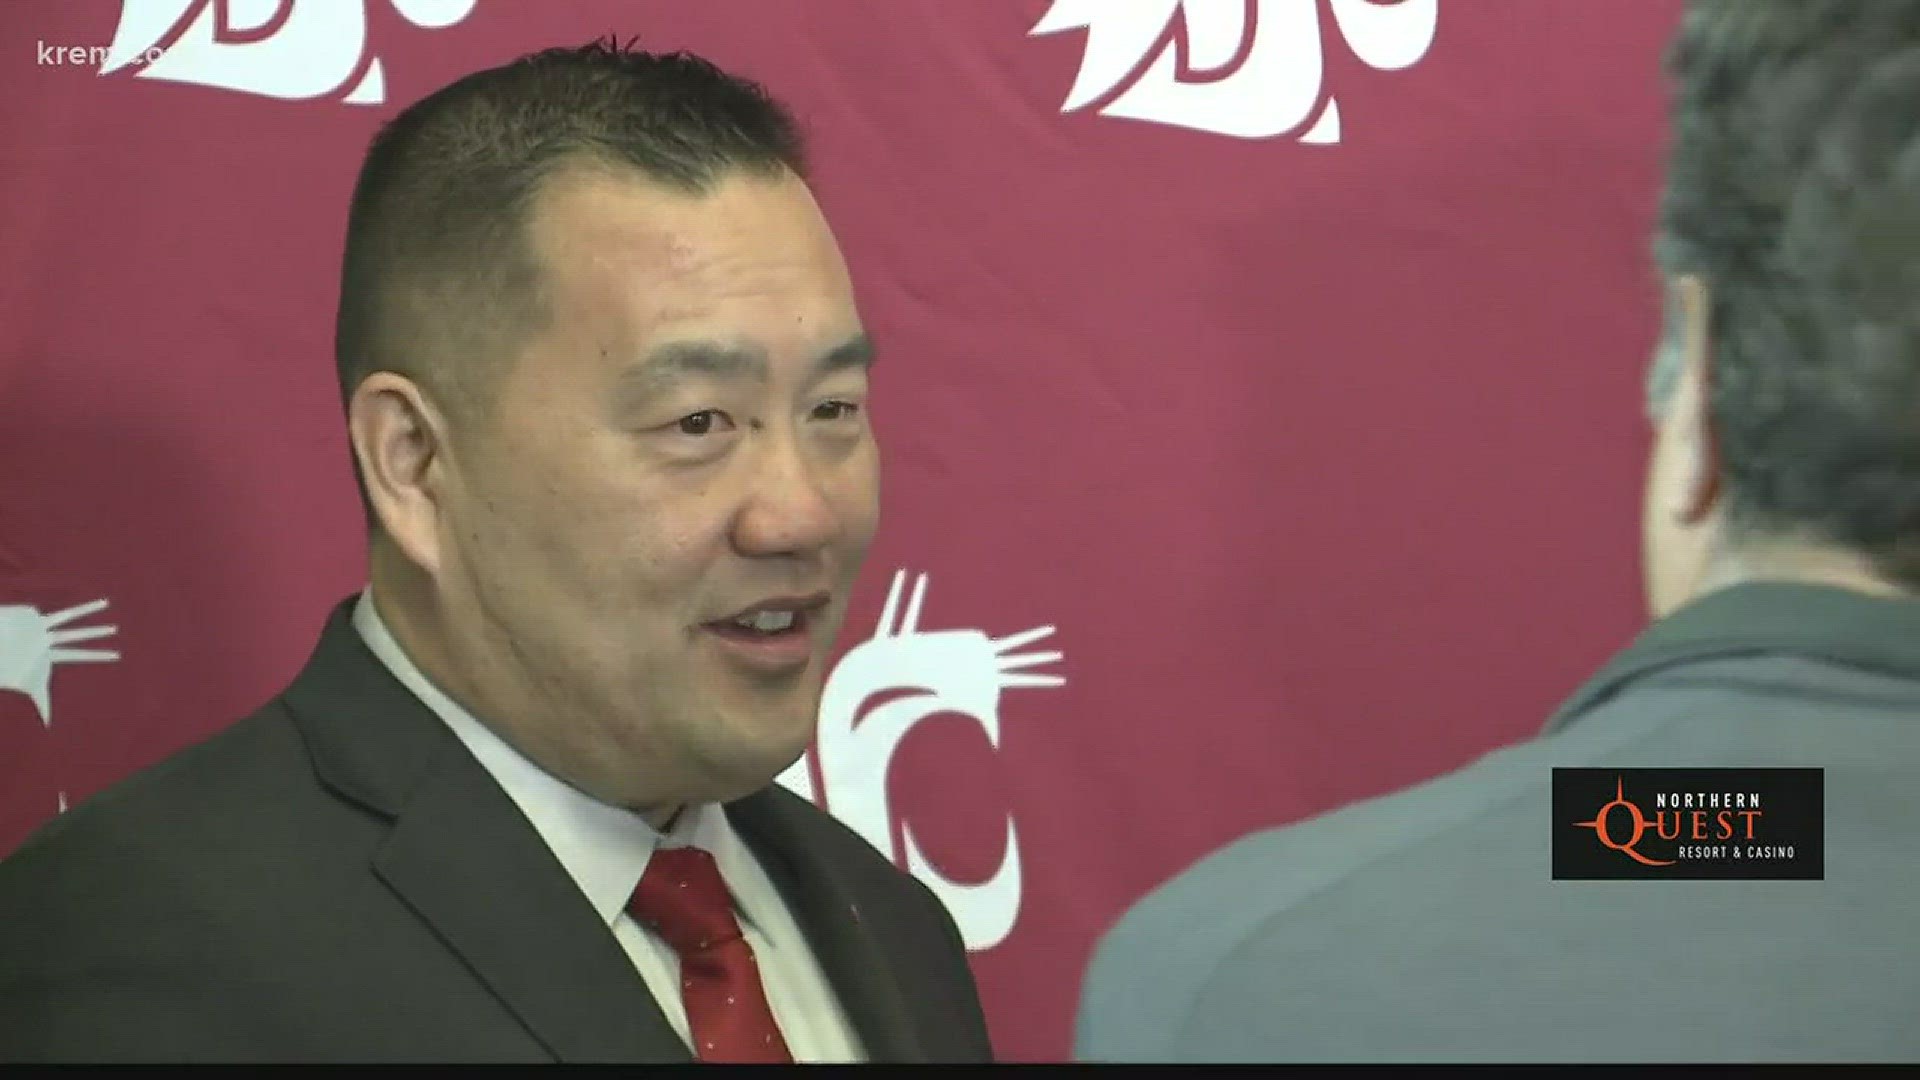 Chun was promoted six times in his 15 years at Ohio State and brought in the largest gift in FAU's history.